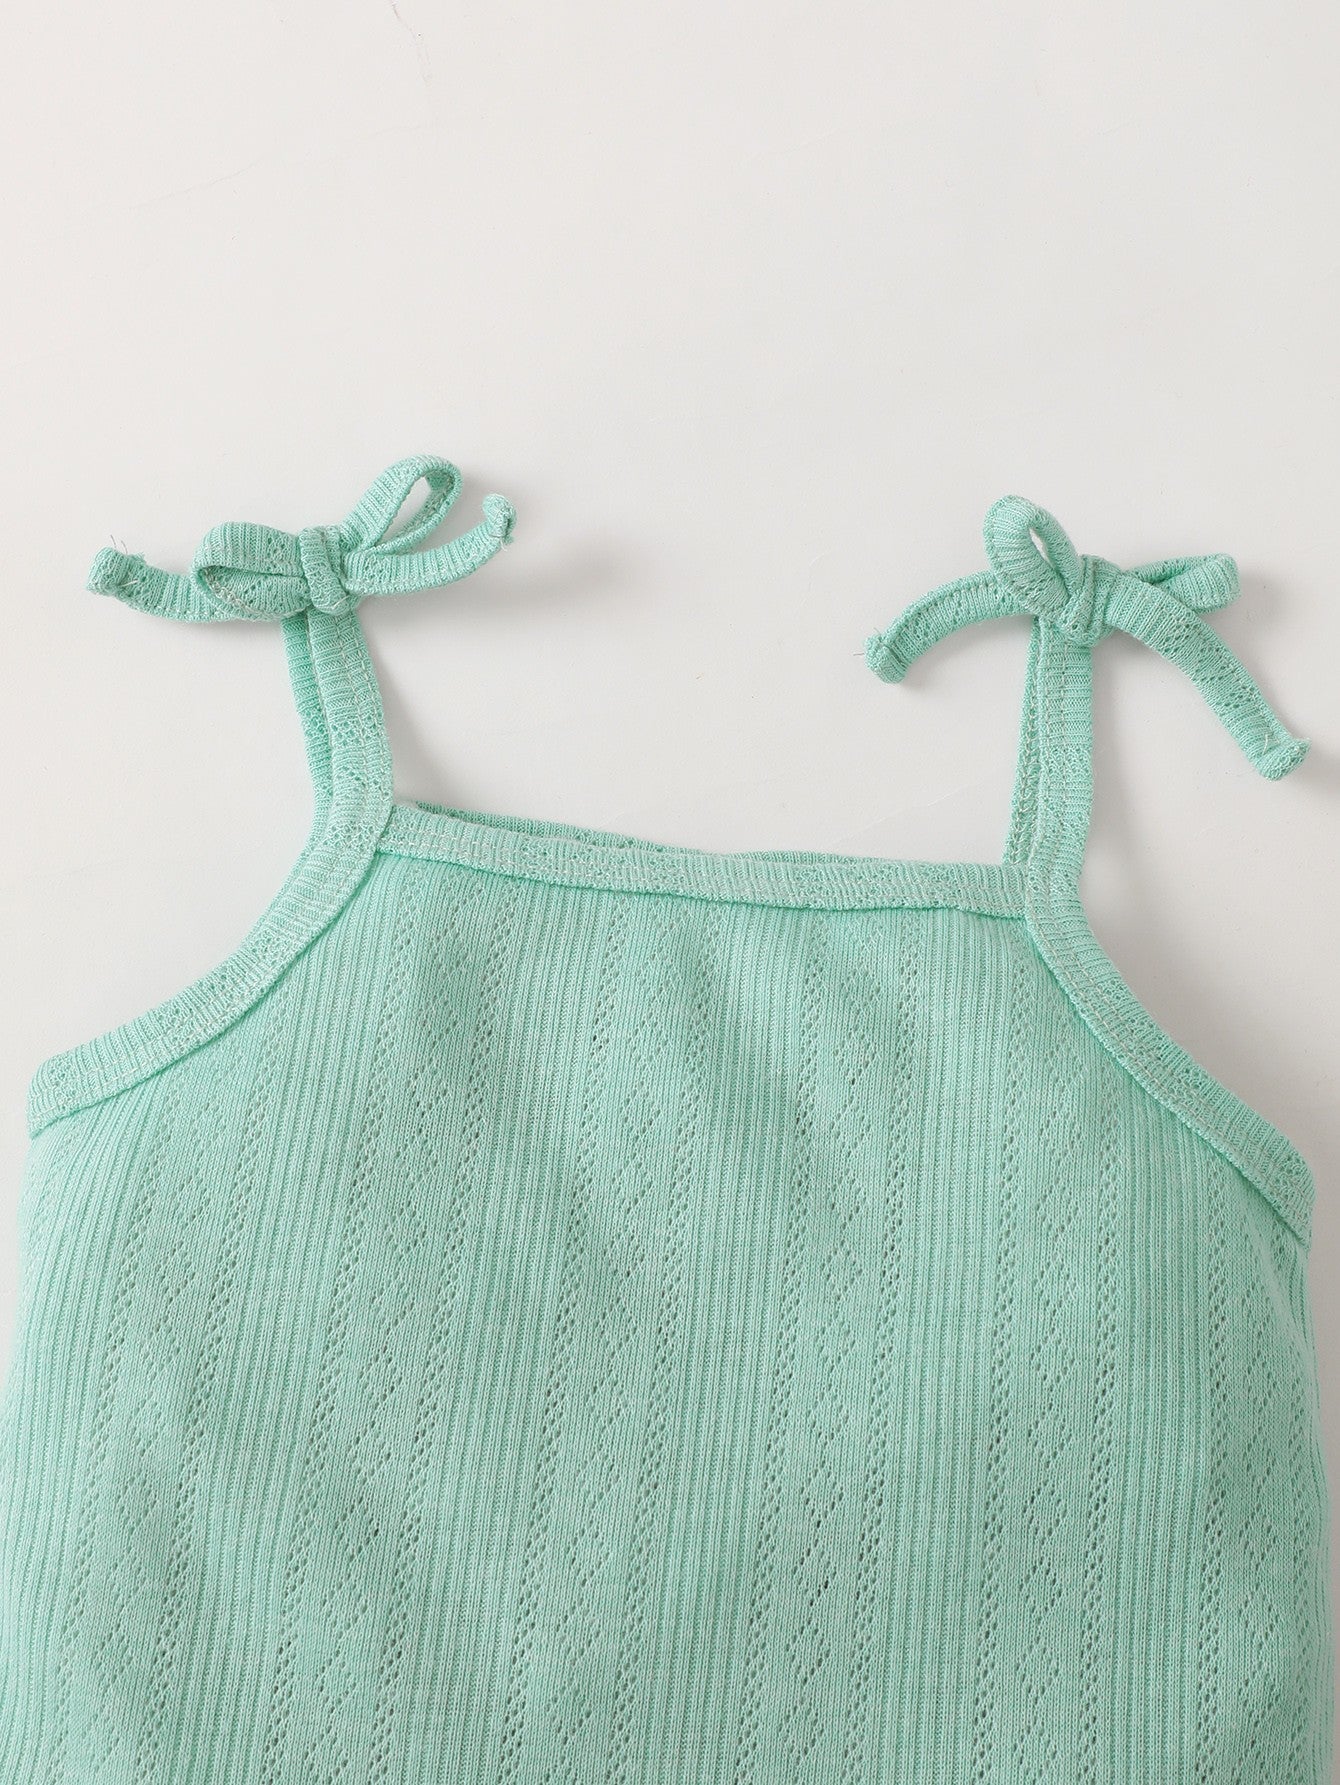 Baby Girl Waffle-Knit Tie-Shoulder Top and Shorts Set - Heart 2 Heart Boutique